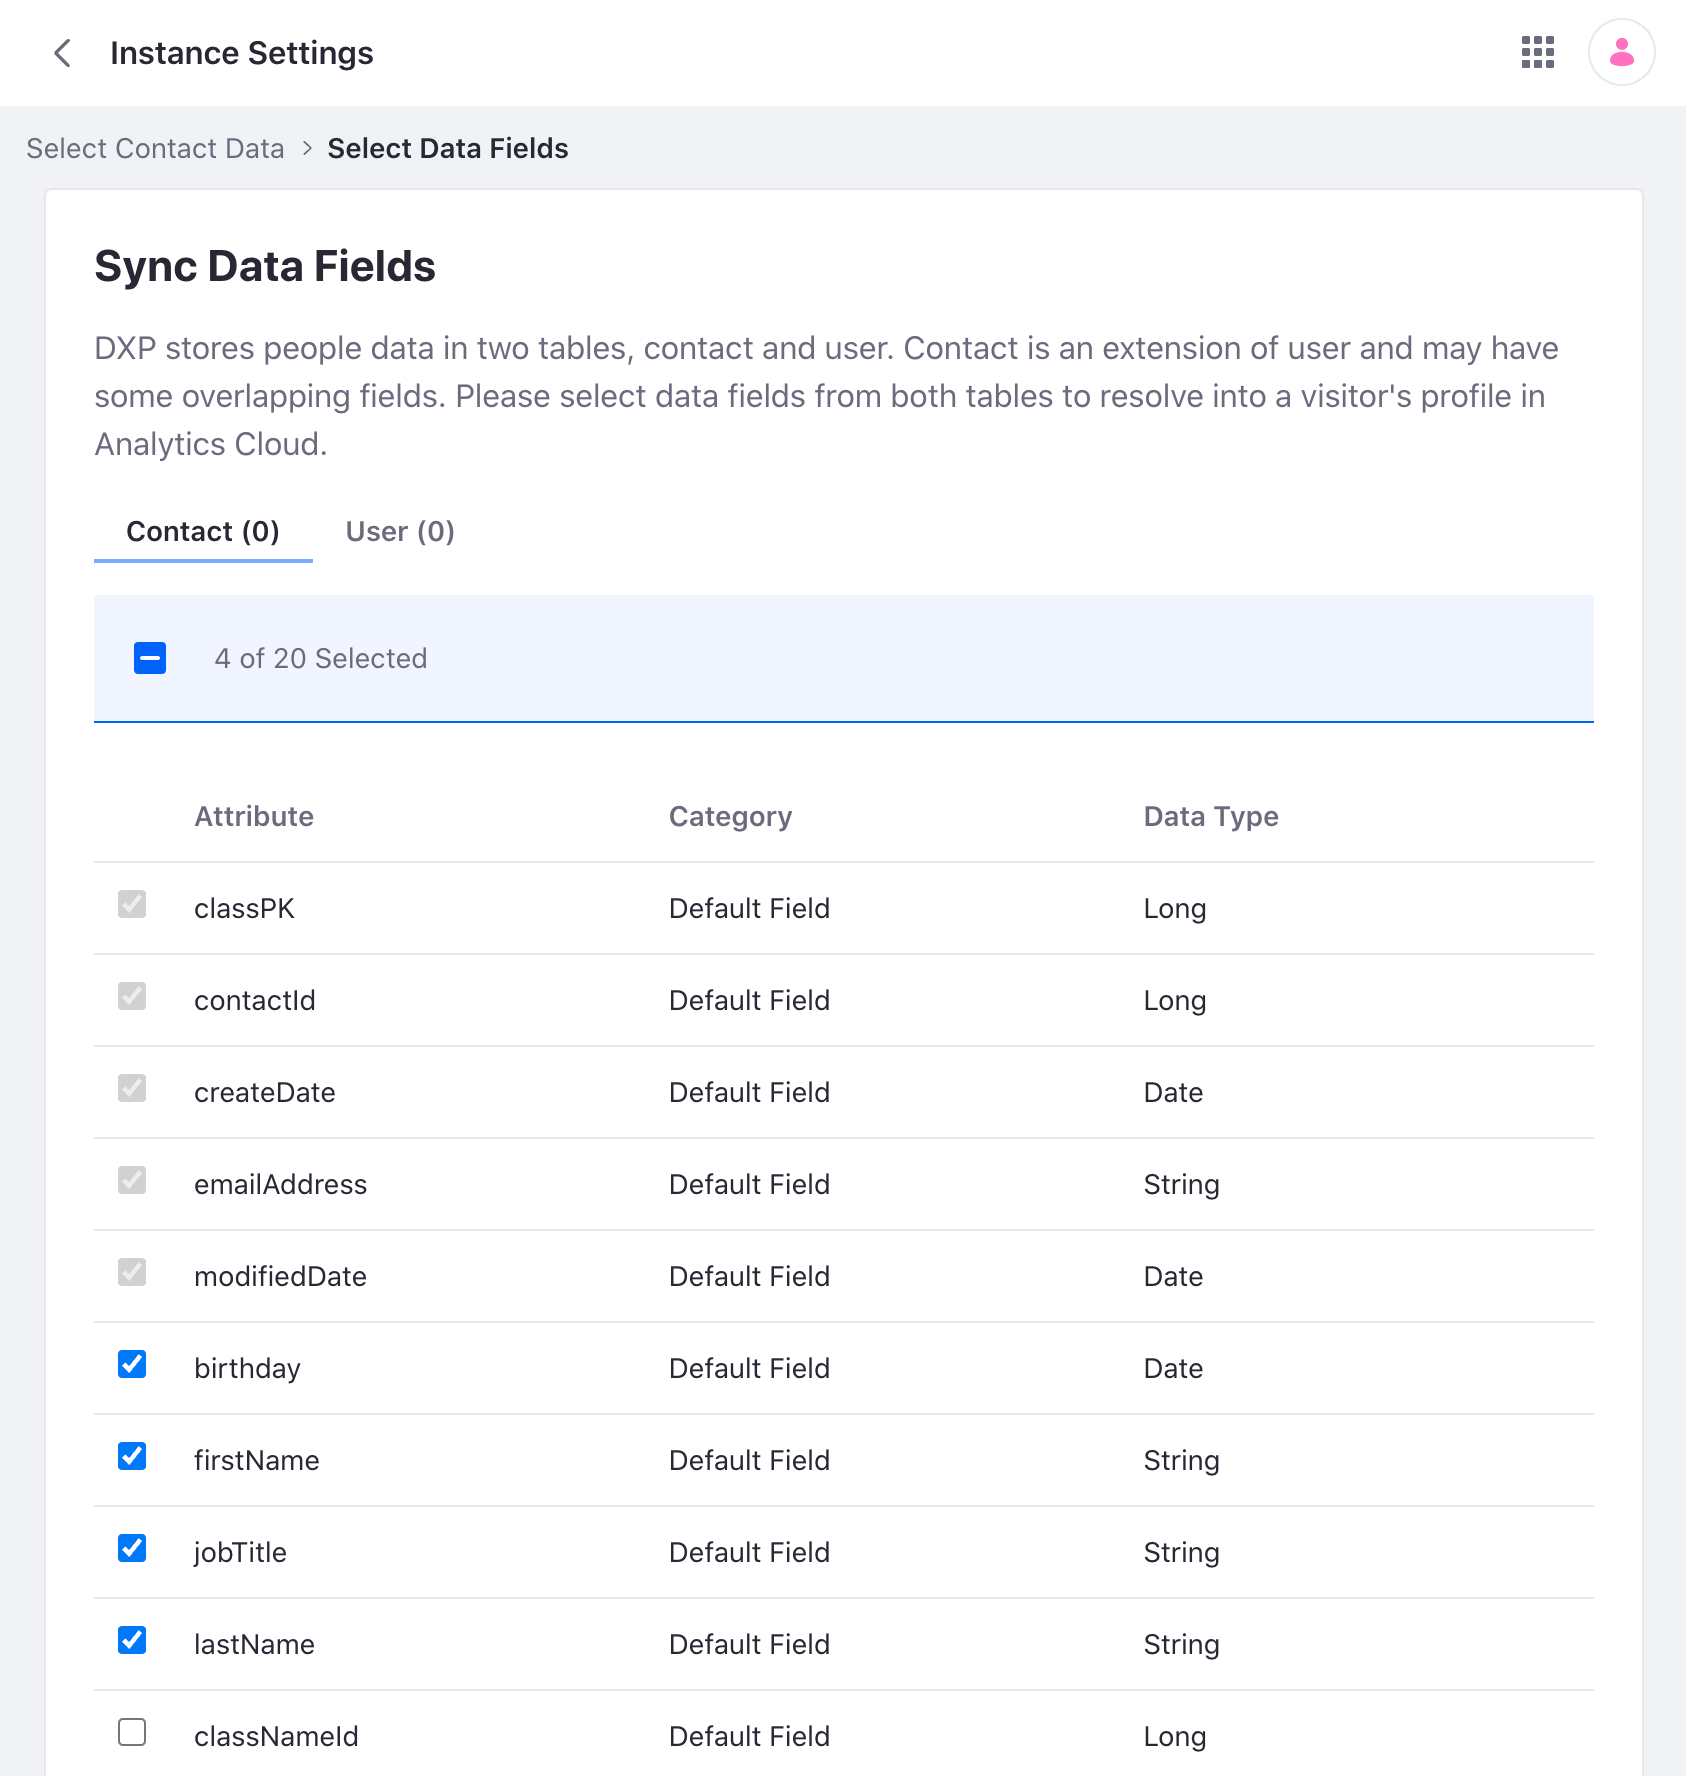 Select the fields you want to sync from the list.